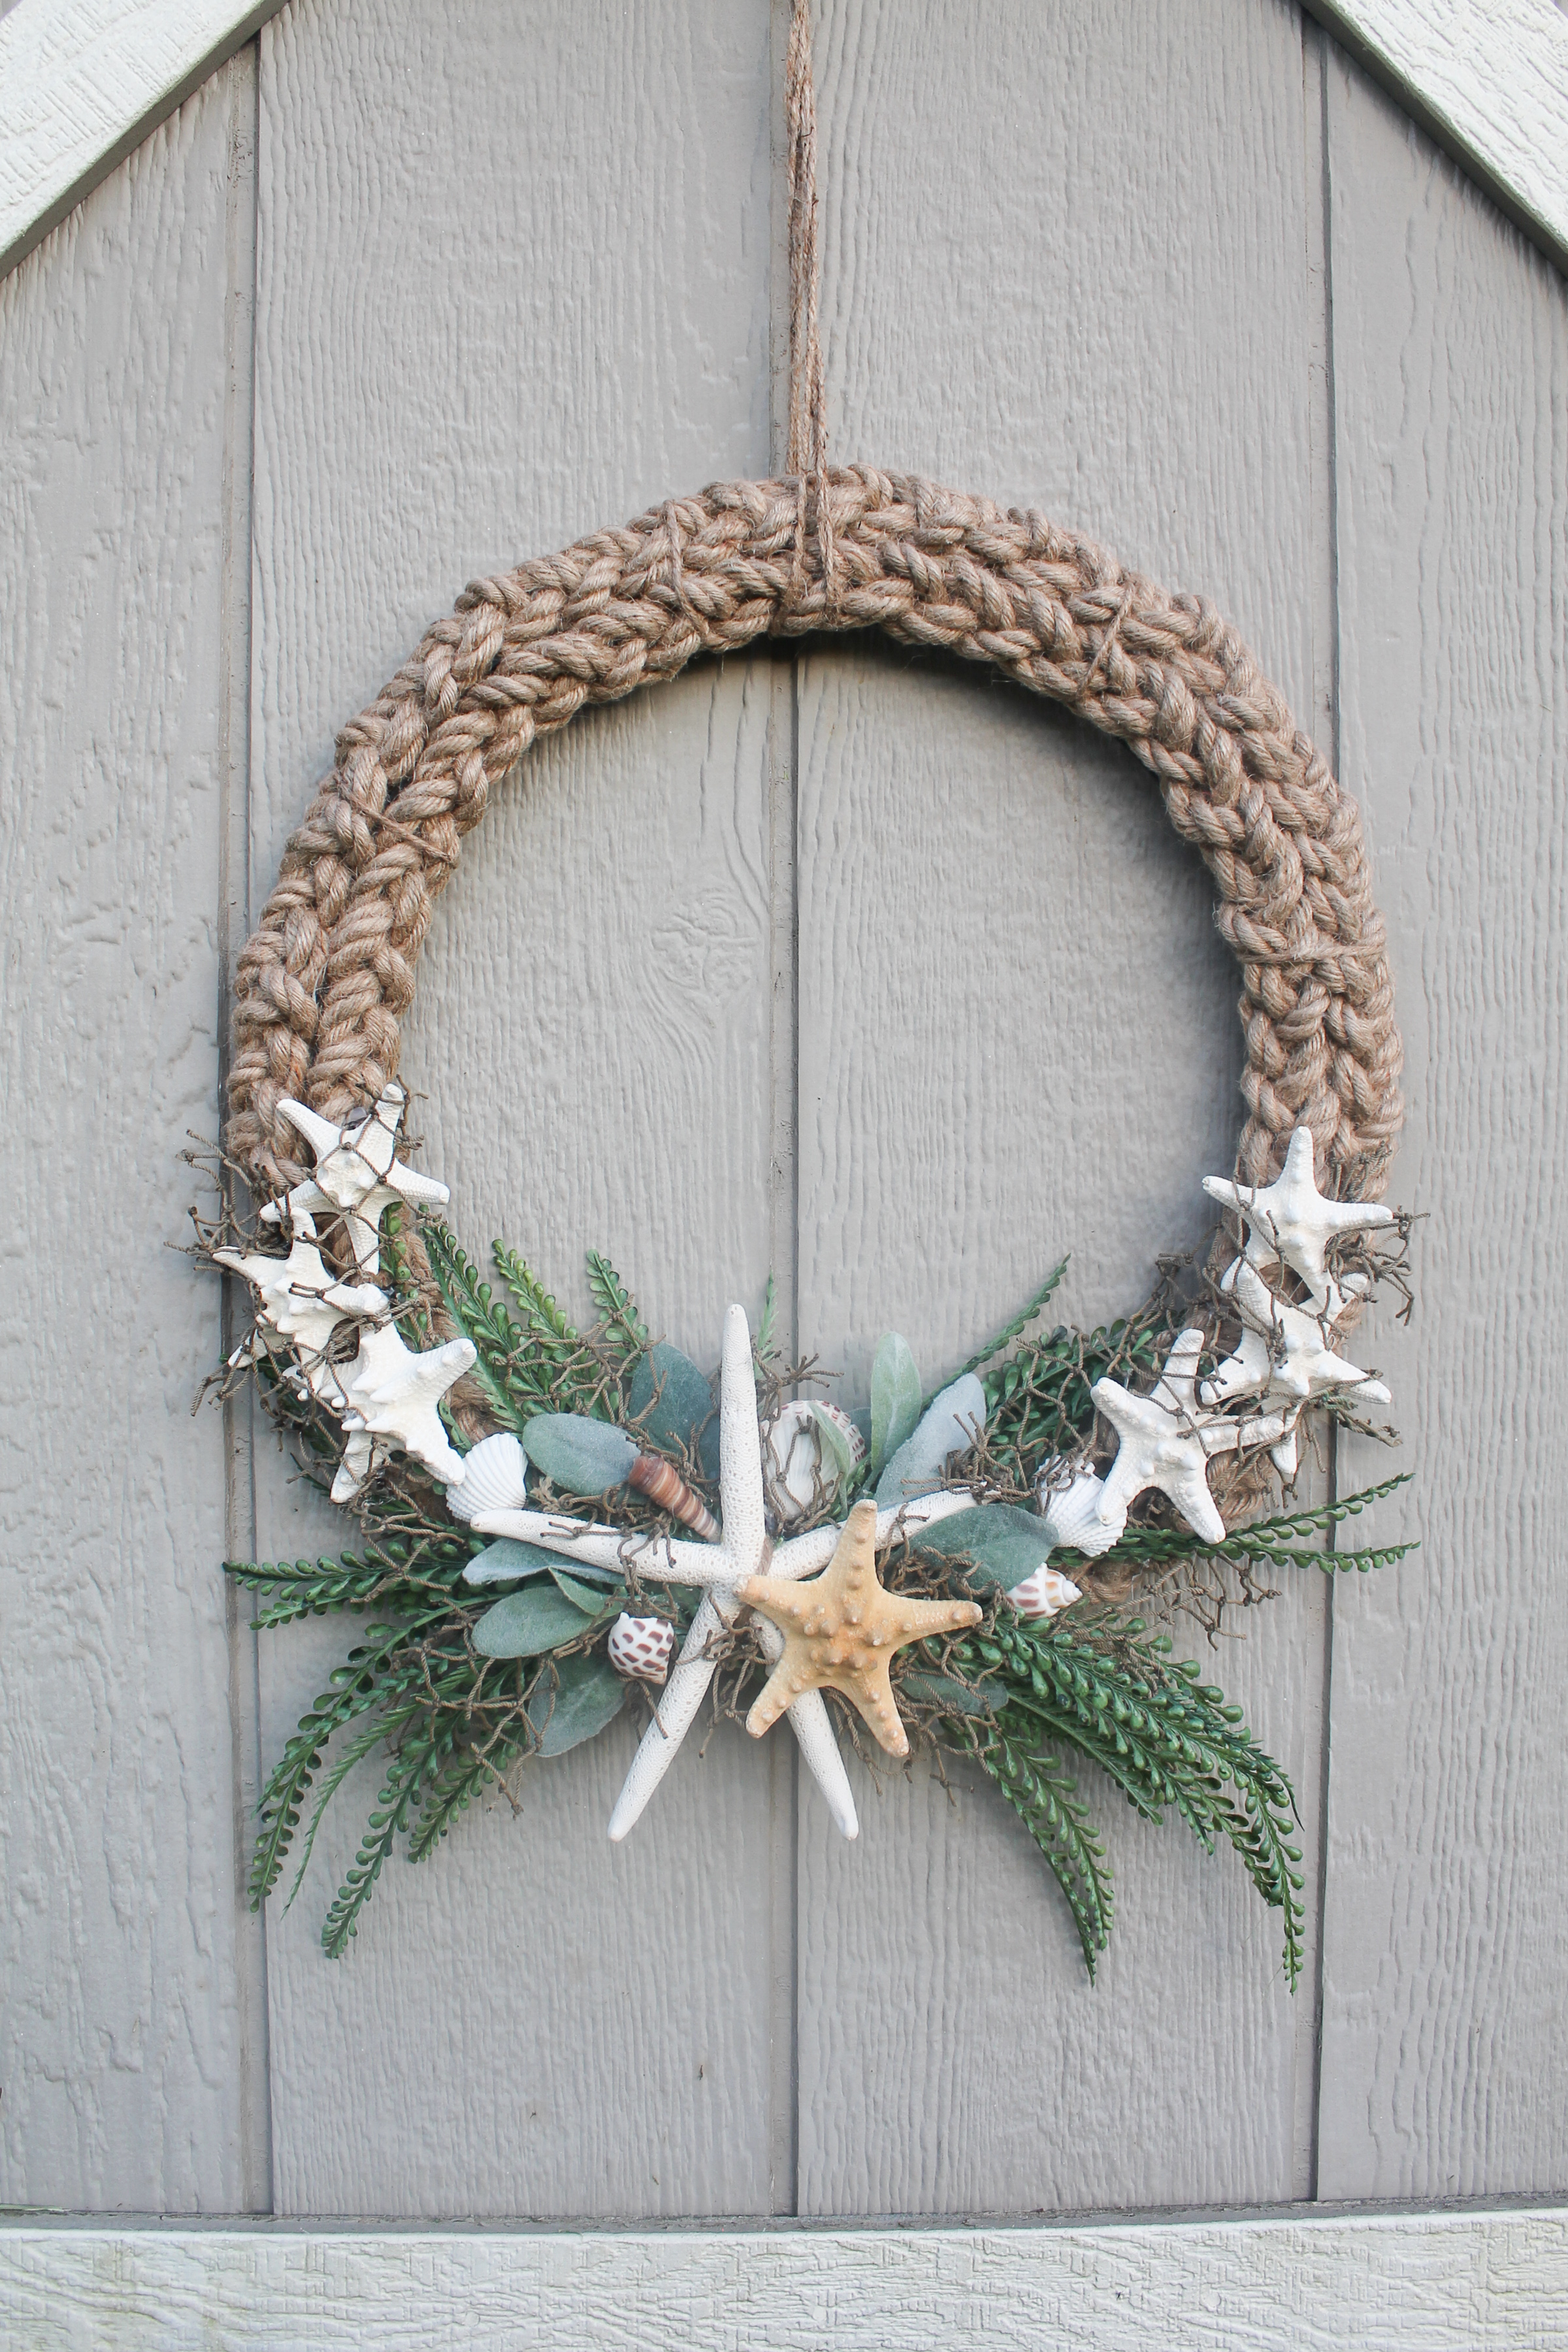 At the Beach nautical wreath for front door outside or inside decorations coastal beach decorations with starfish & sea shells 